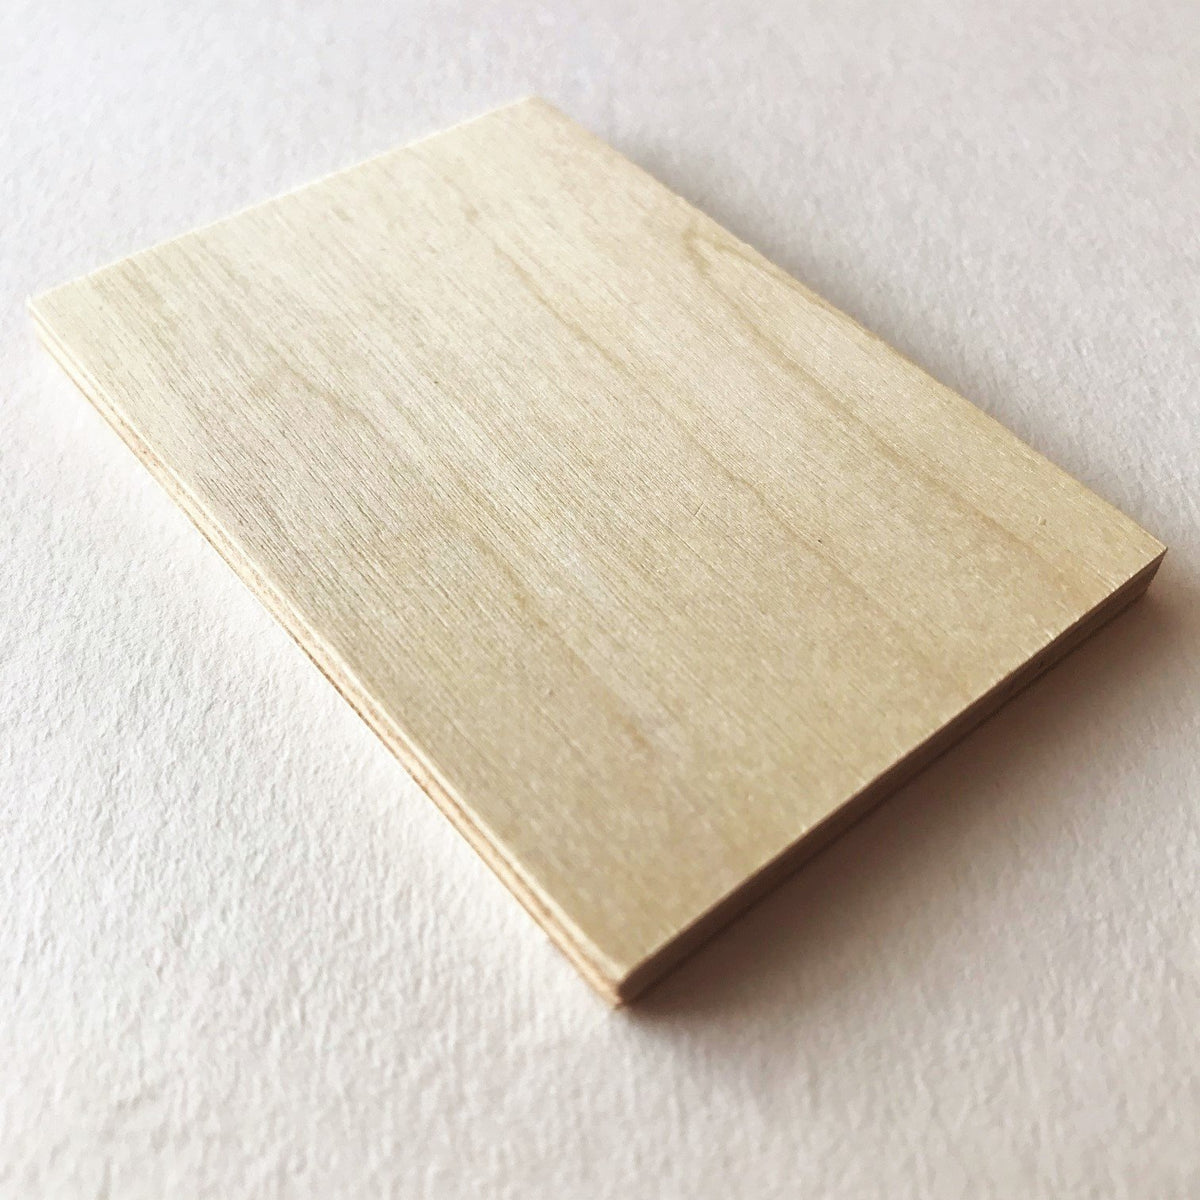 Baltic Birch Plywood, 3 mm 1/8 x 8 x 8 Inch Craft Wood, Box of 100 B/BB  Grade Baltic Birch Sheets, Perfect for Laser, CNC Cutting and Wood Burning,  by